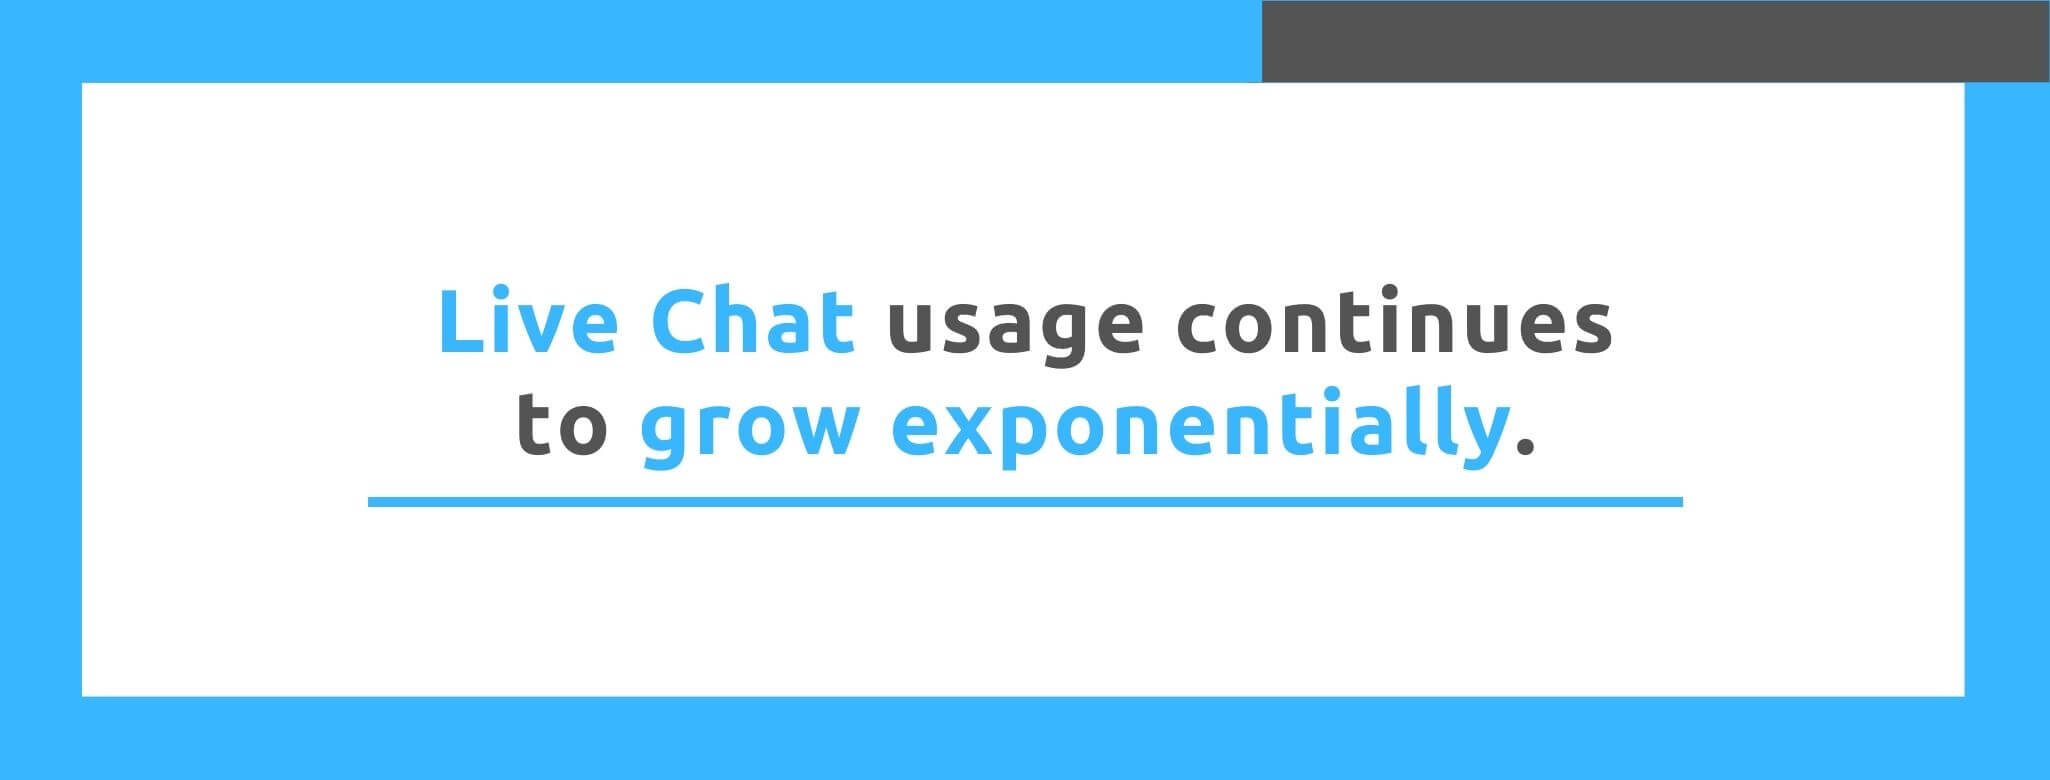 Live Chat usage continues to grow exponentially - 22 Live Chat Statistics - Replyco